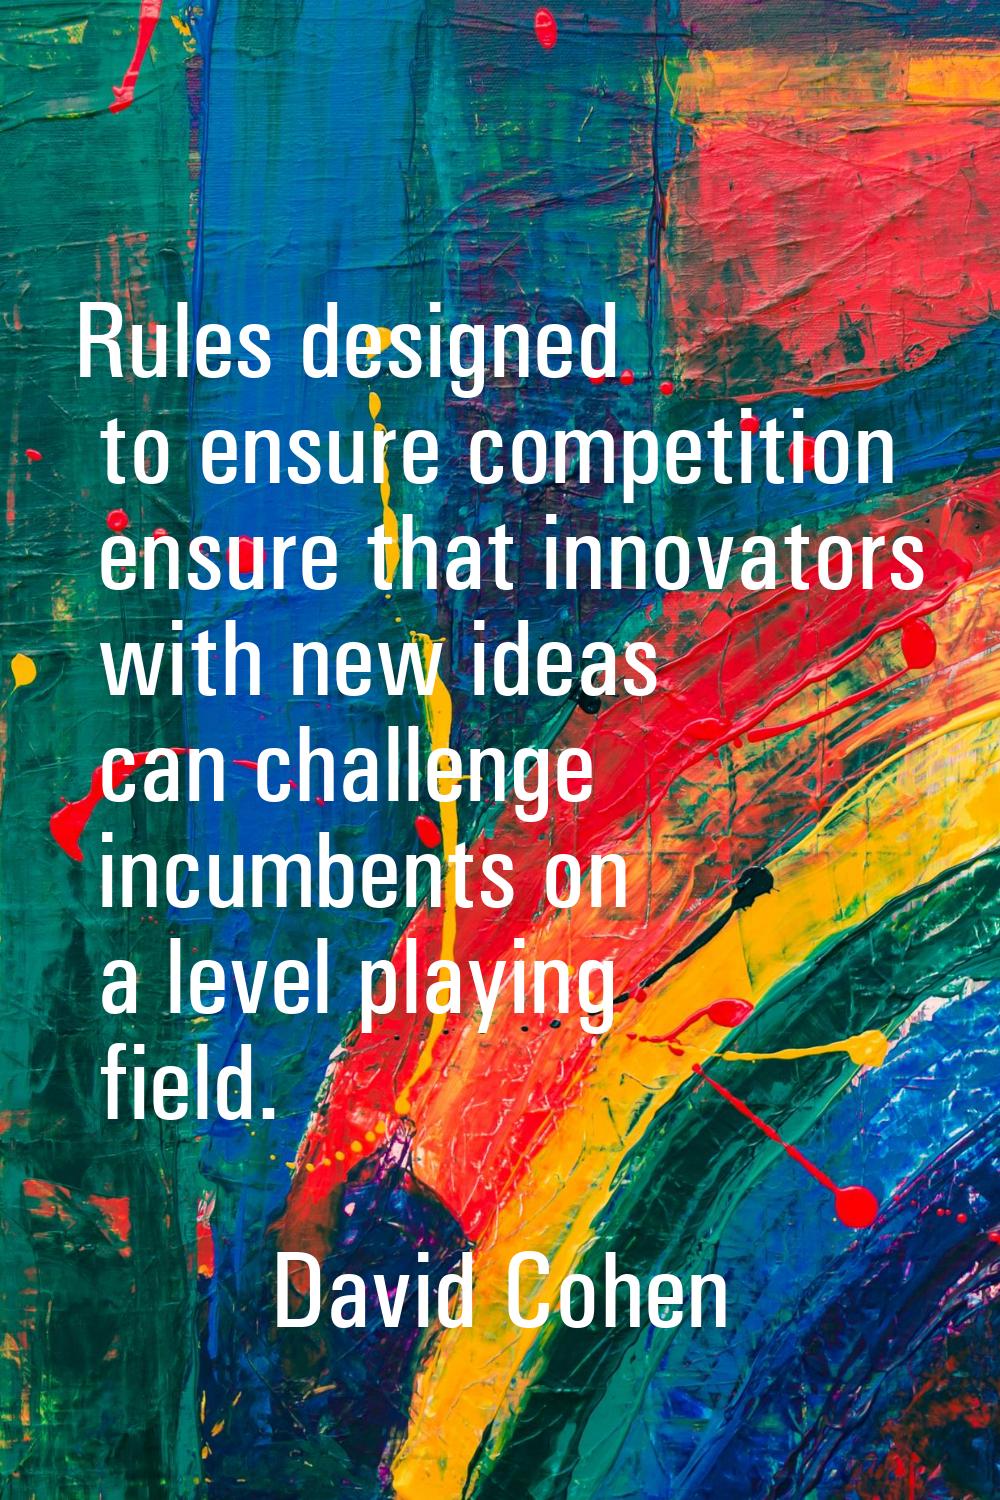 Rules designed to ensure competition ensure that innovators with new ideas can challenge incumbents